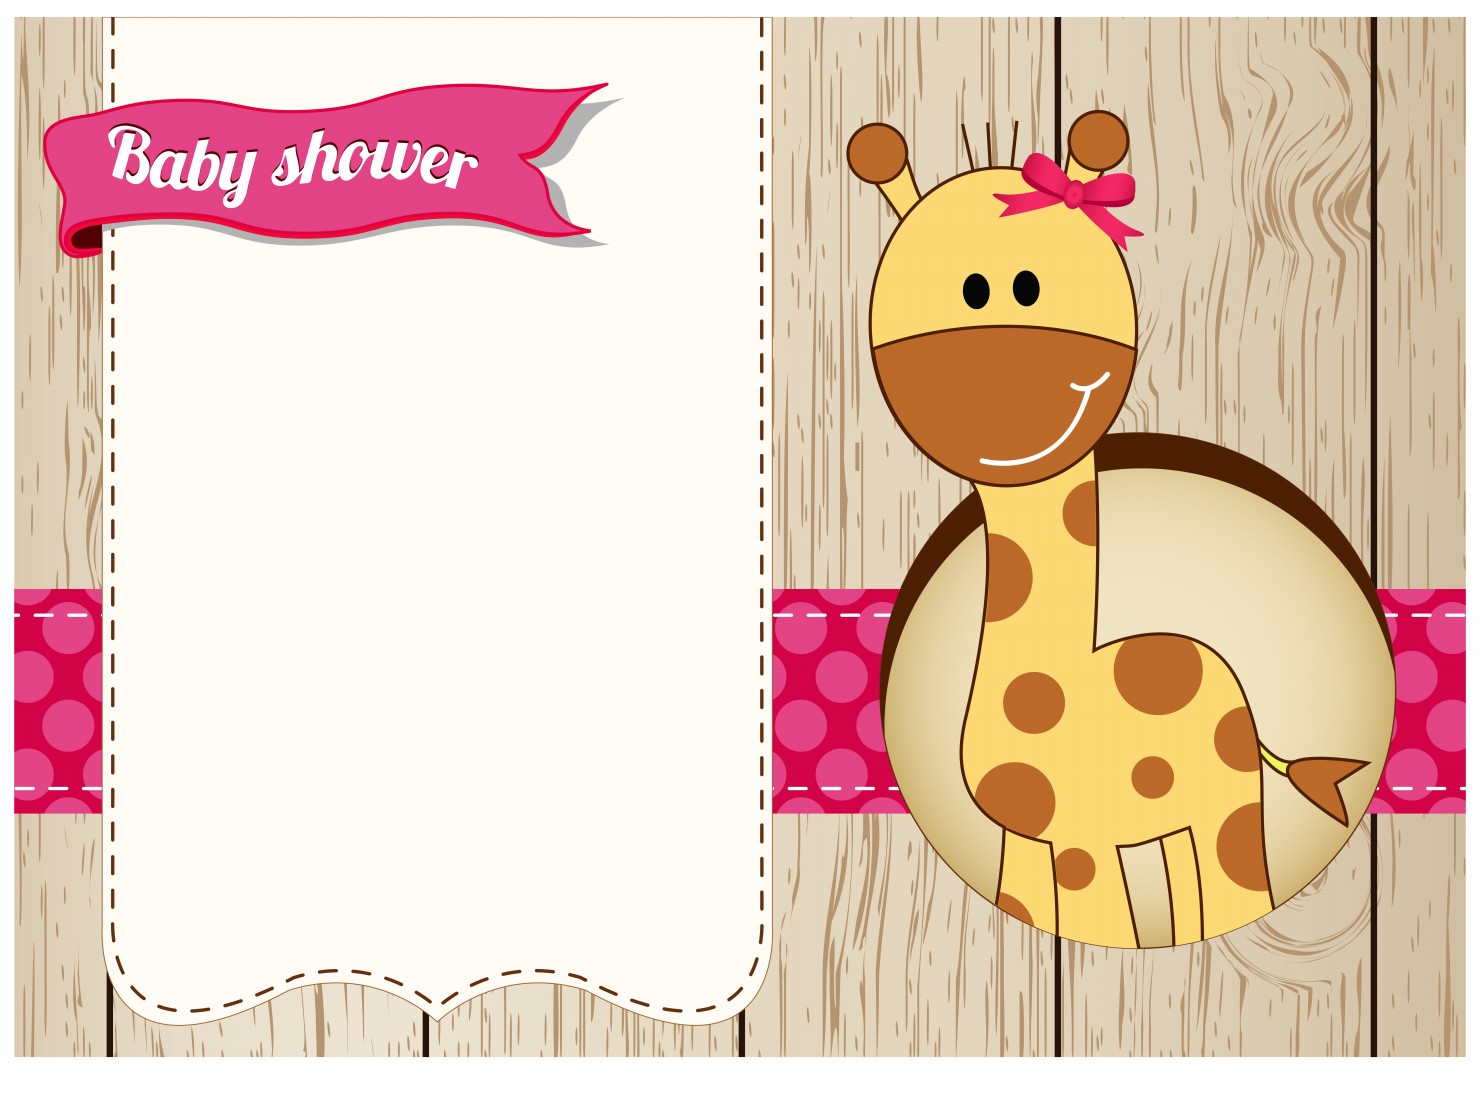 baby shower clip art free download - photo #33